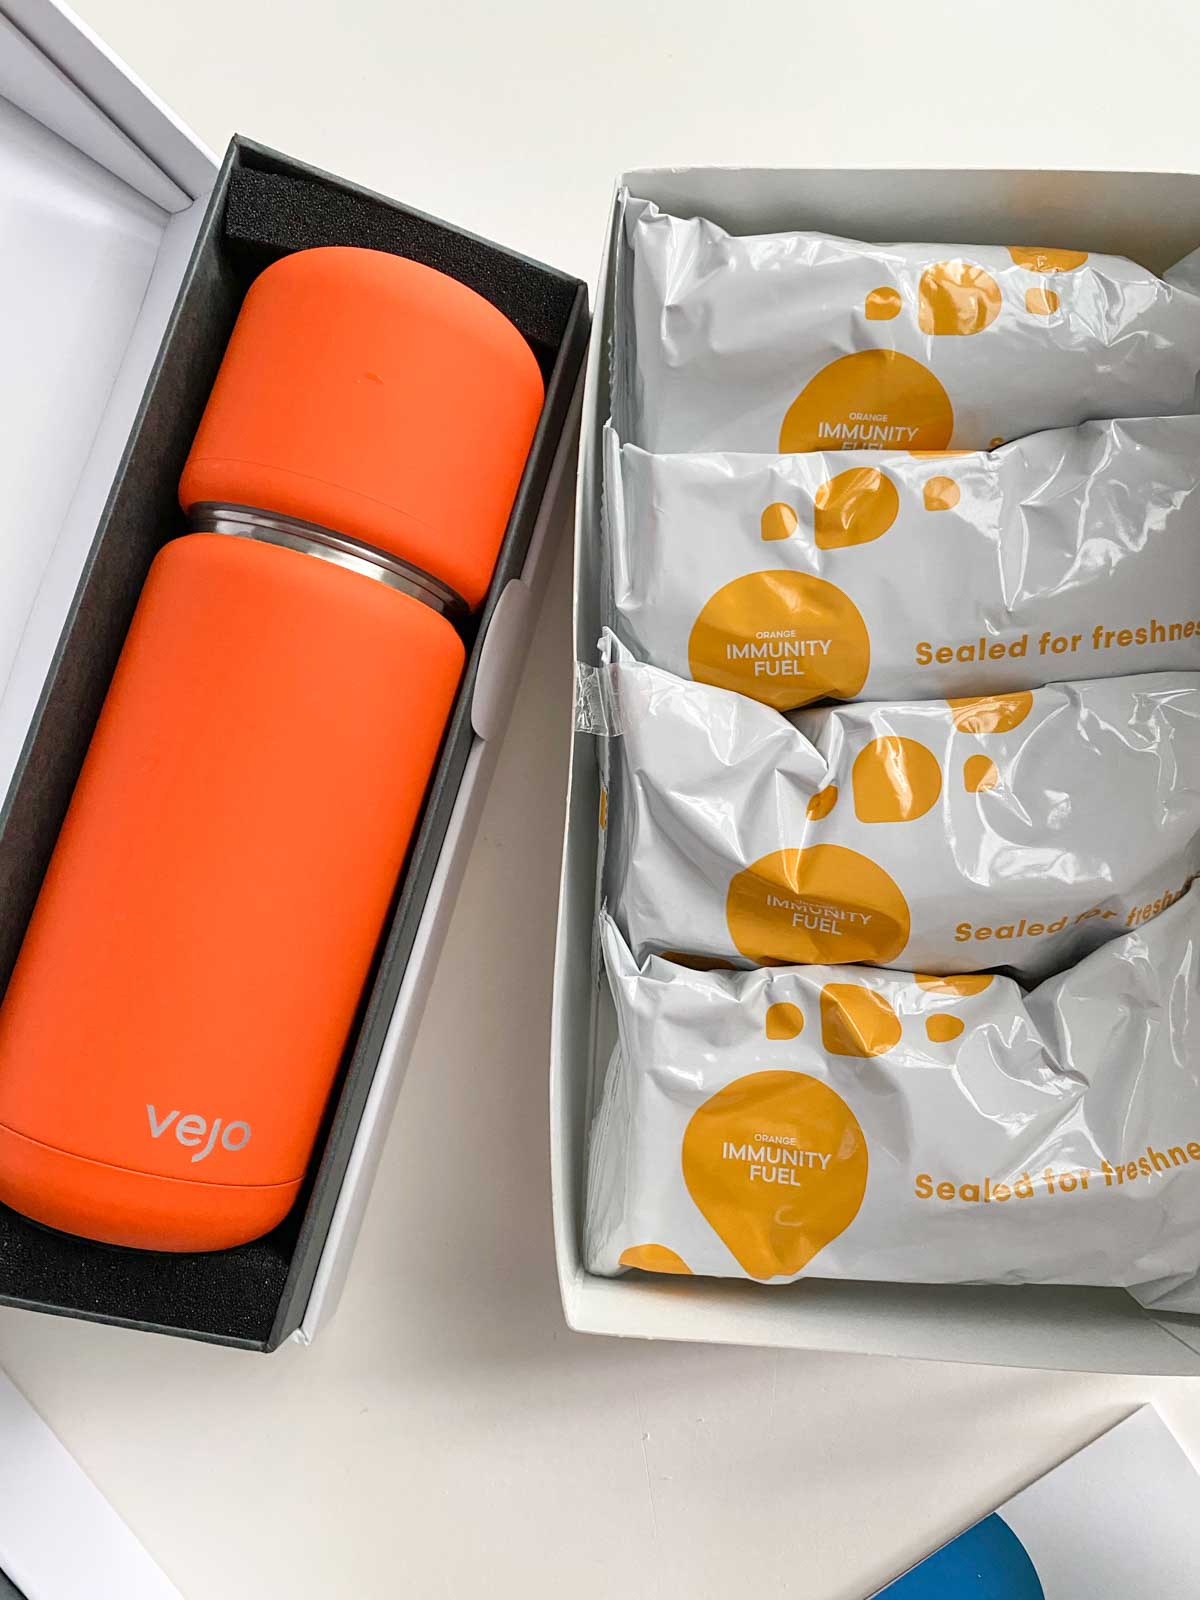 vejo orange portable blender with immunity fuel pod packets gifted for vejo review